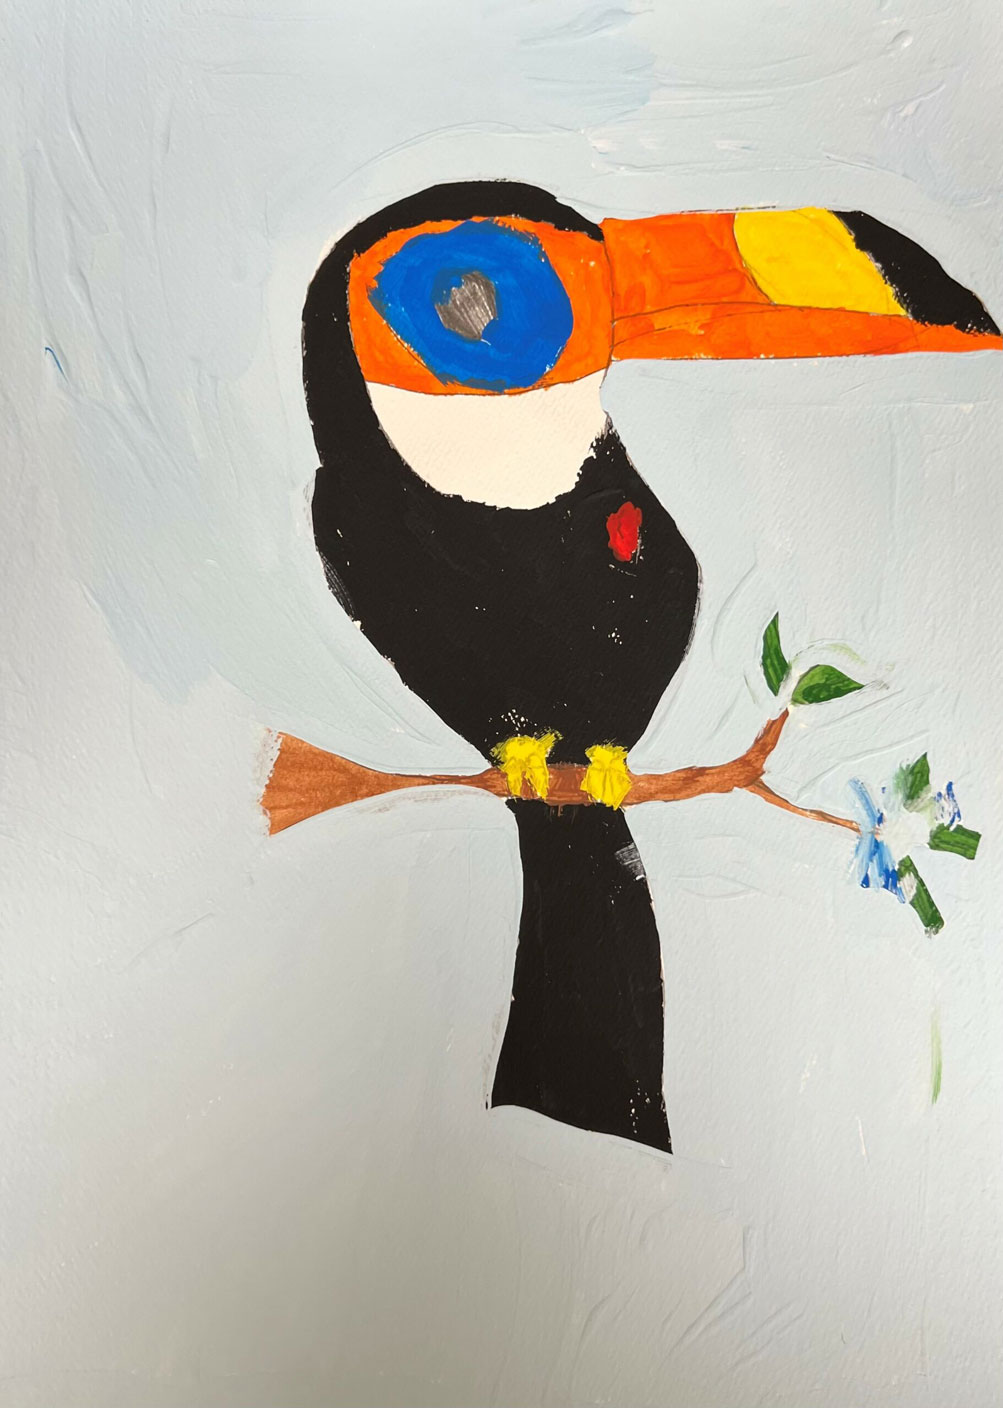 A child's painting of a toucan, on a white background.